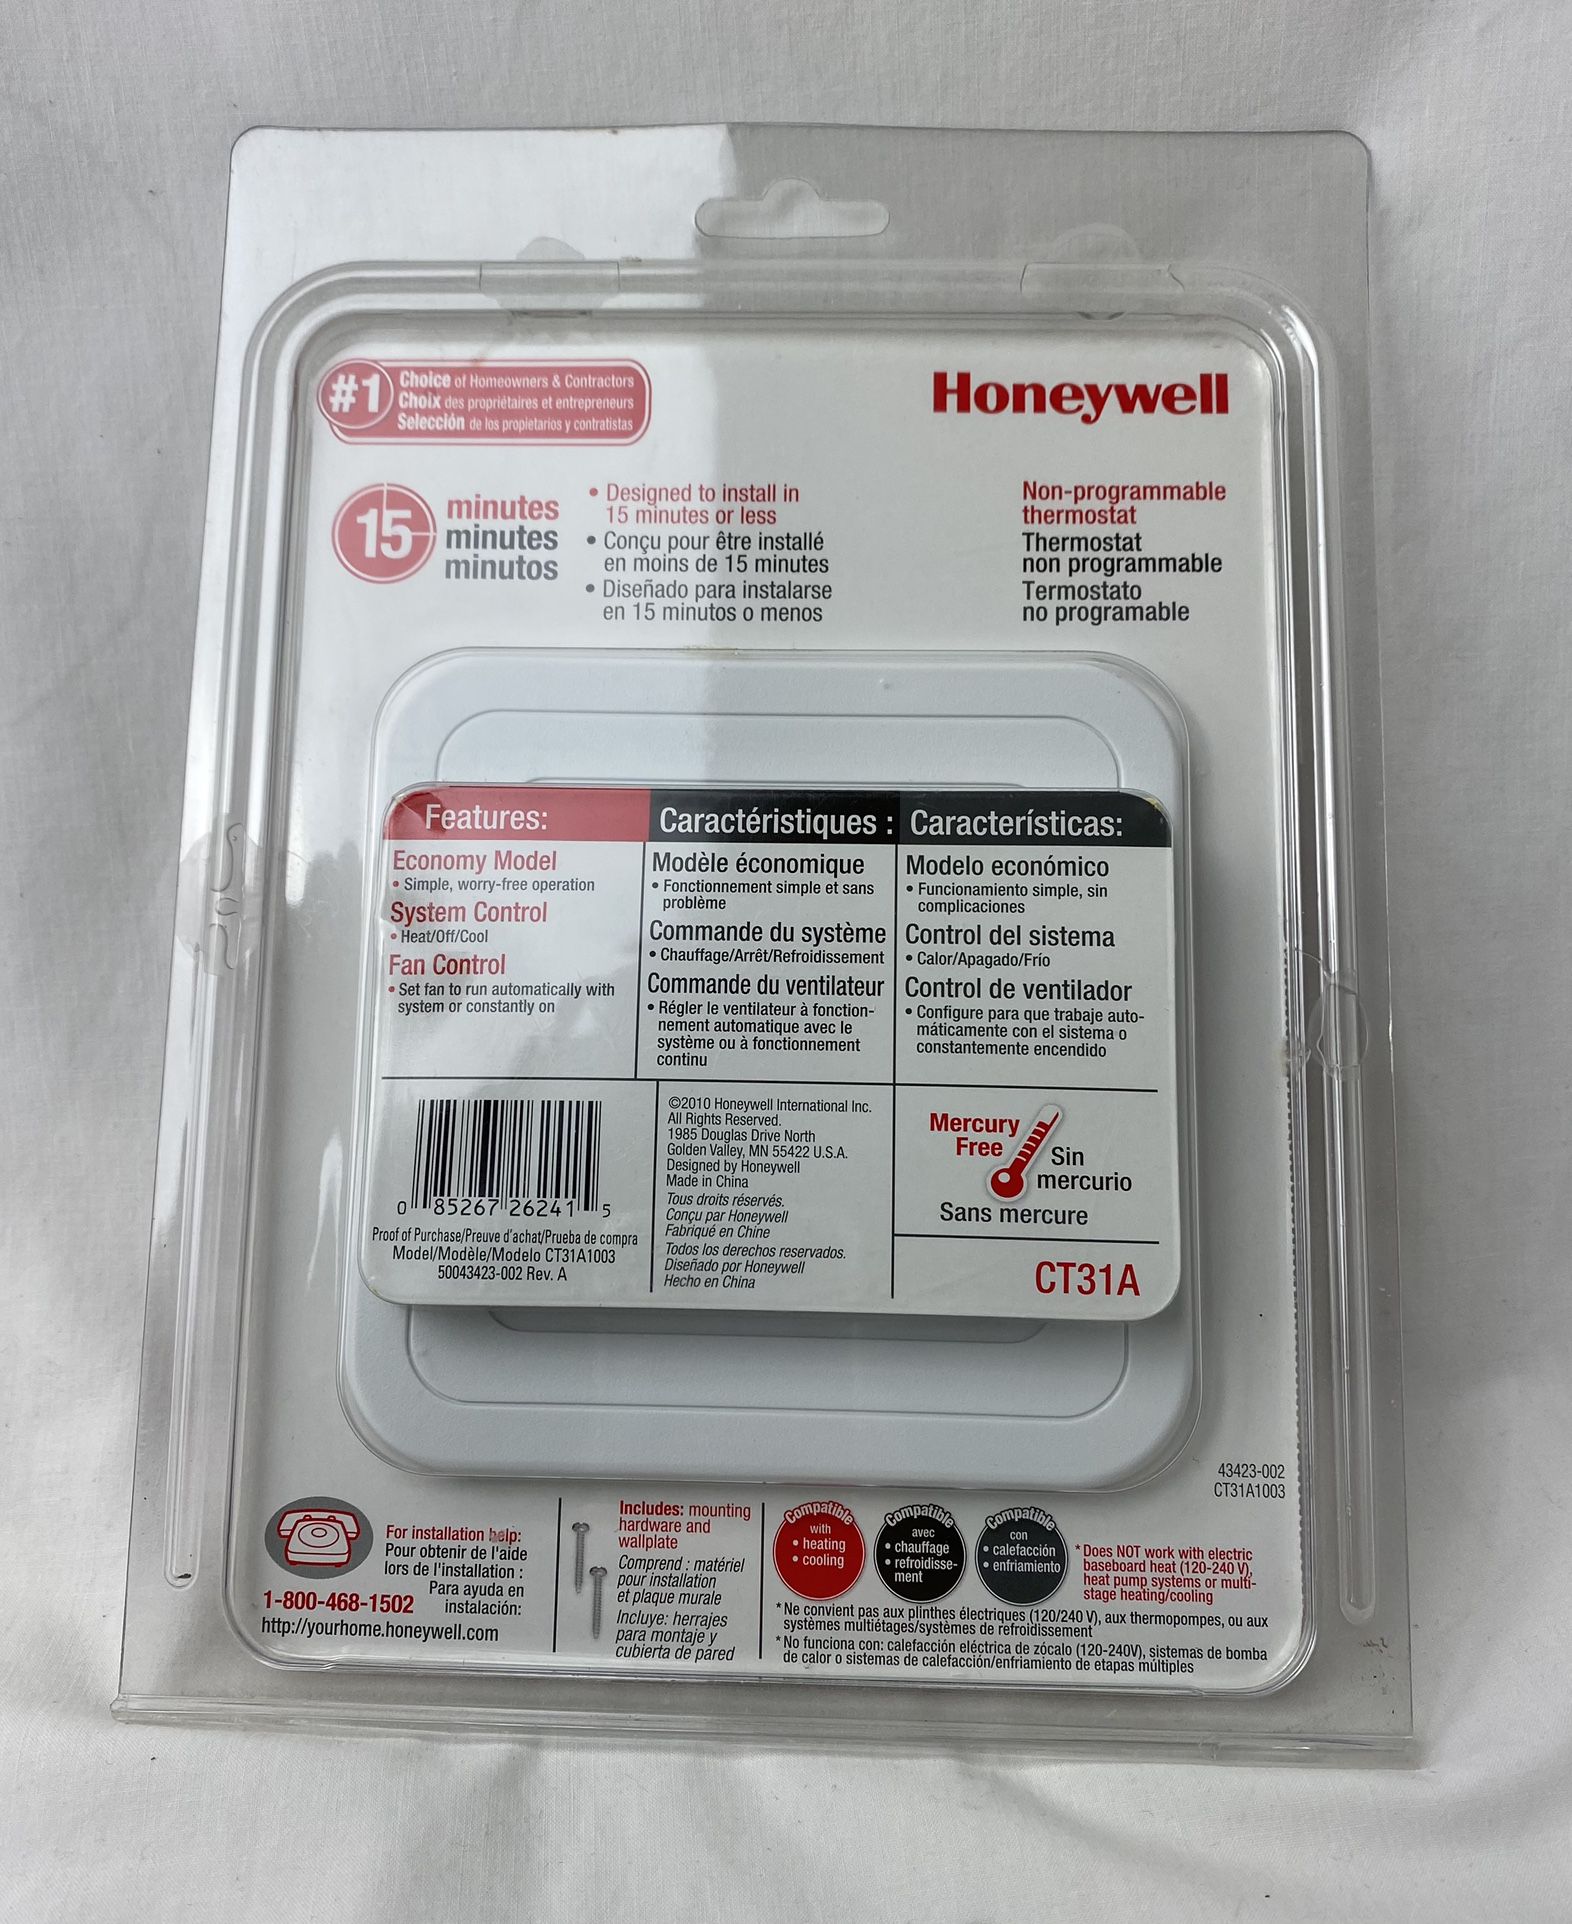 Honeywell CT31A 1003 Heat/Cool Non-Programmable Thermostat